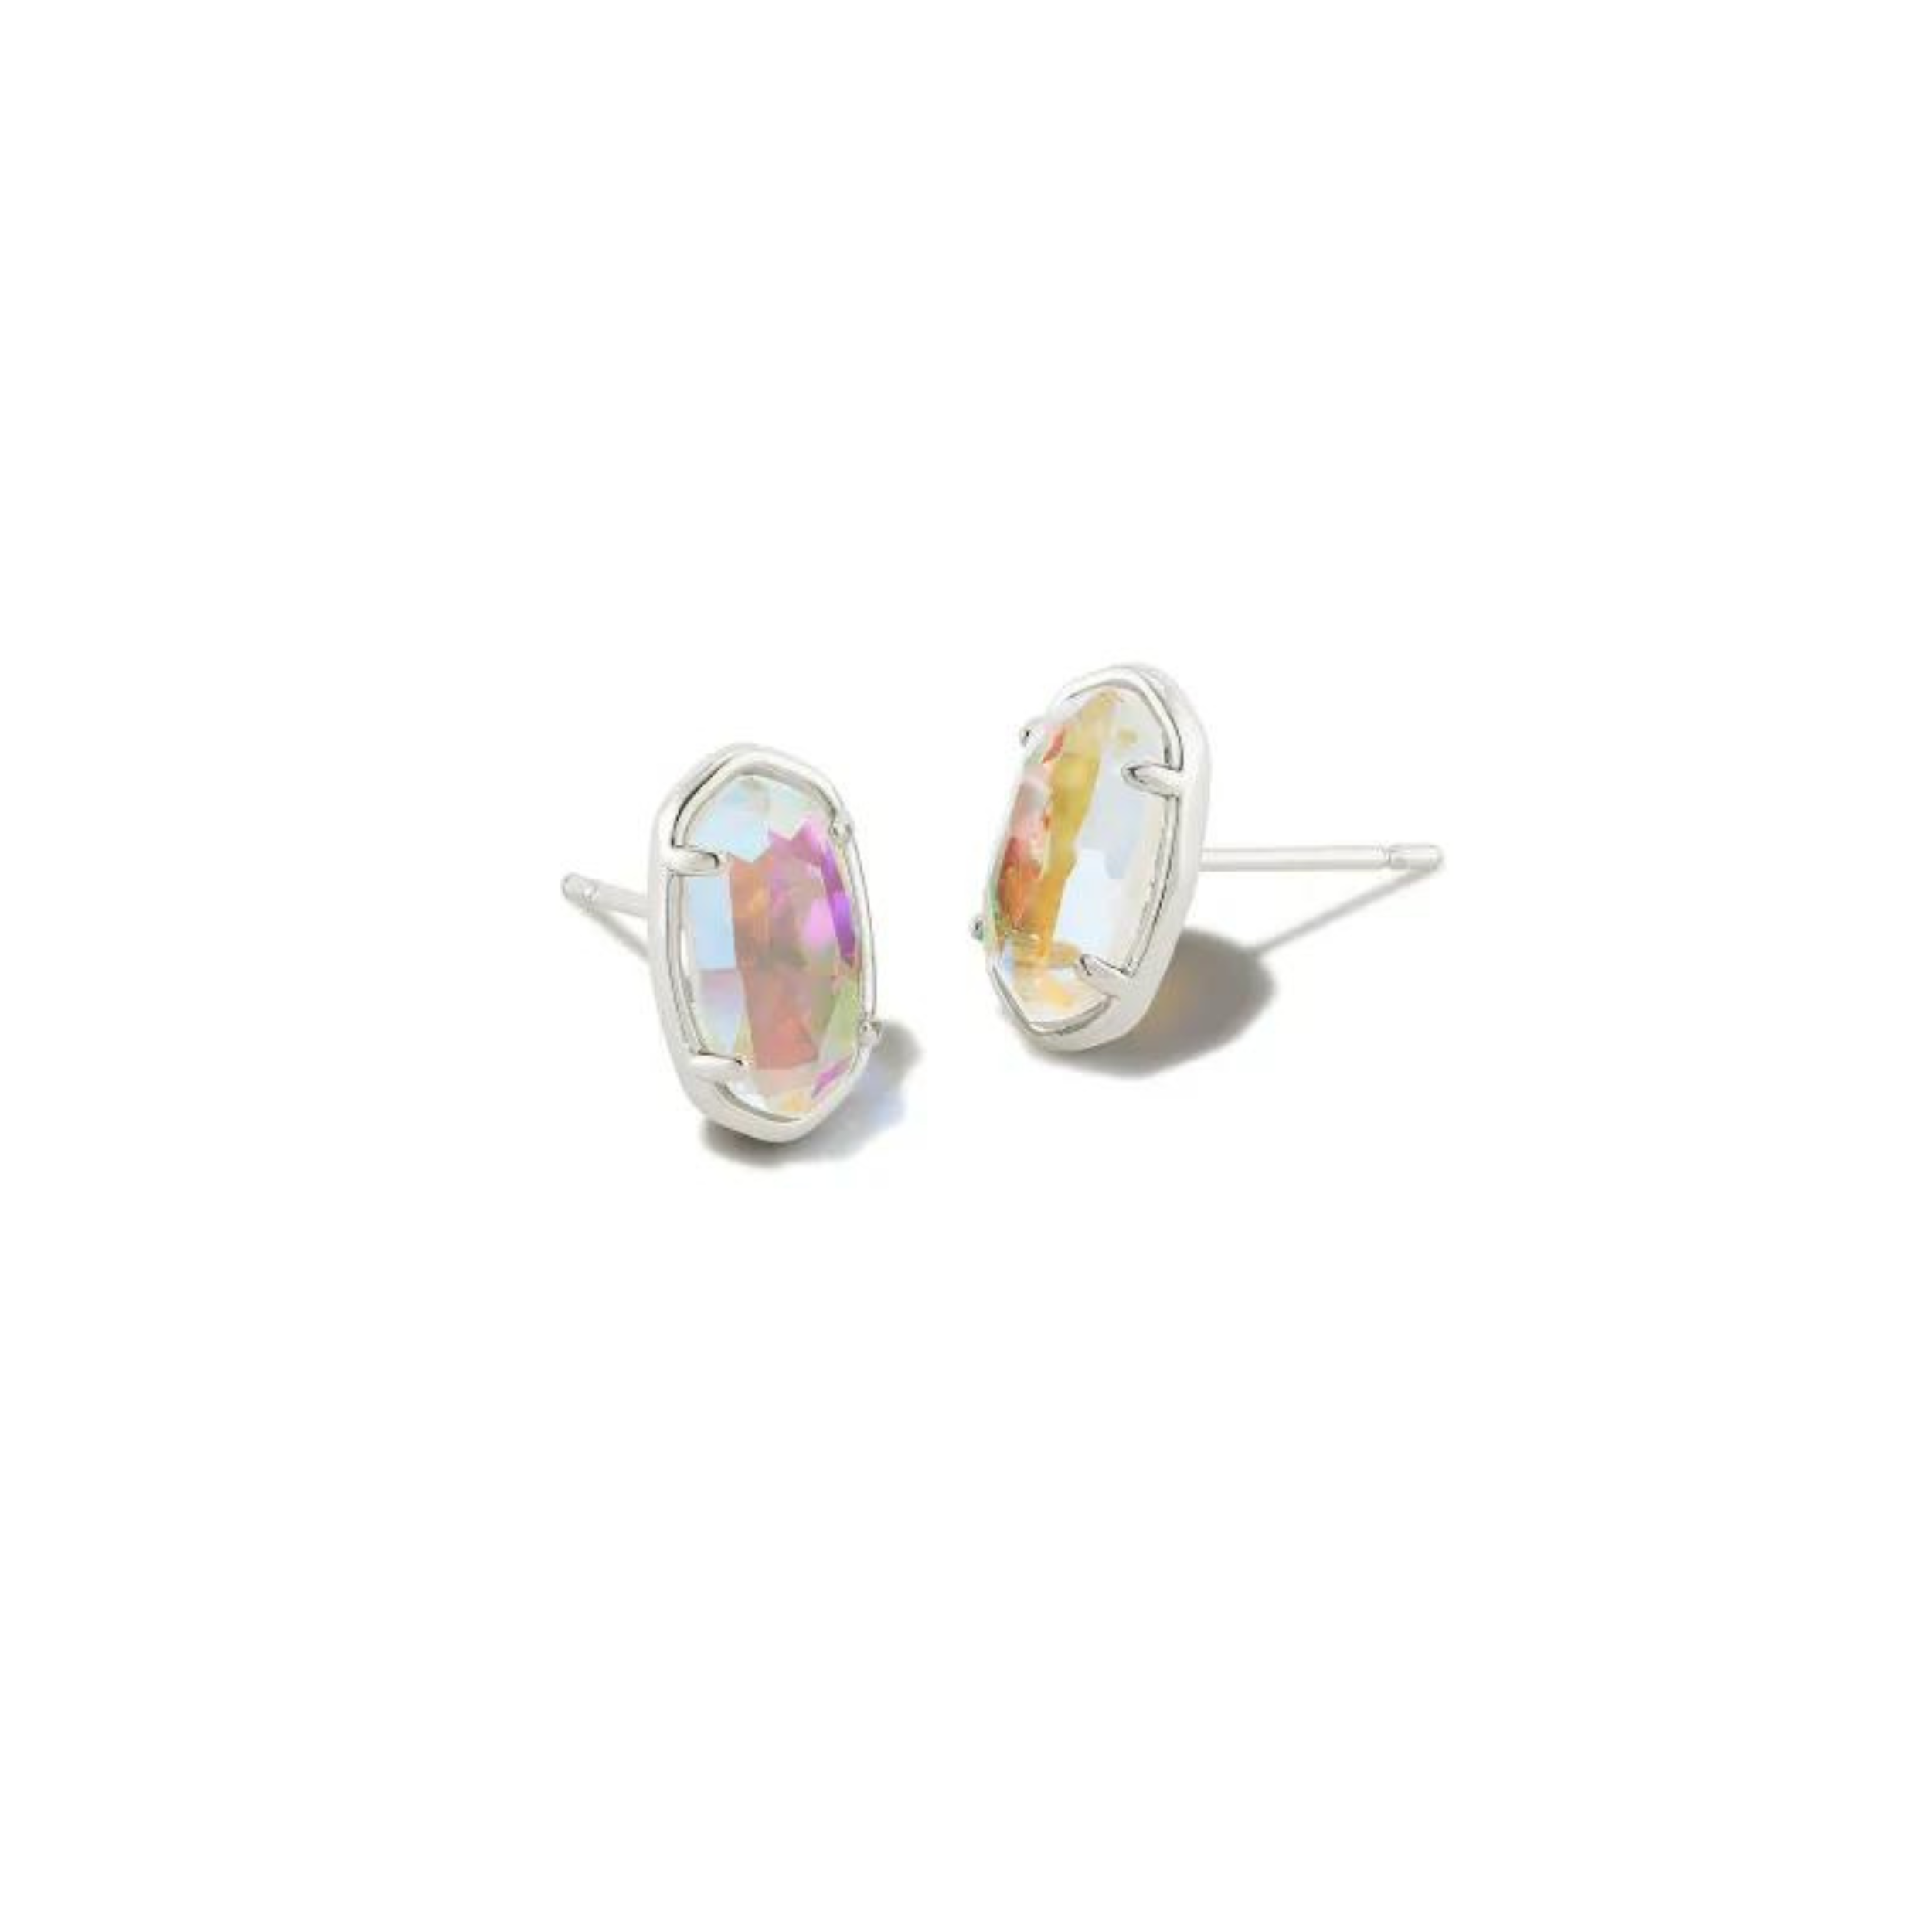 Kendra Scott | Grayson Silver Stud Earrings in Dichroic Glass - Giddy Up Glamour Boutique